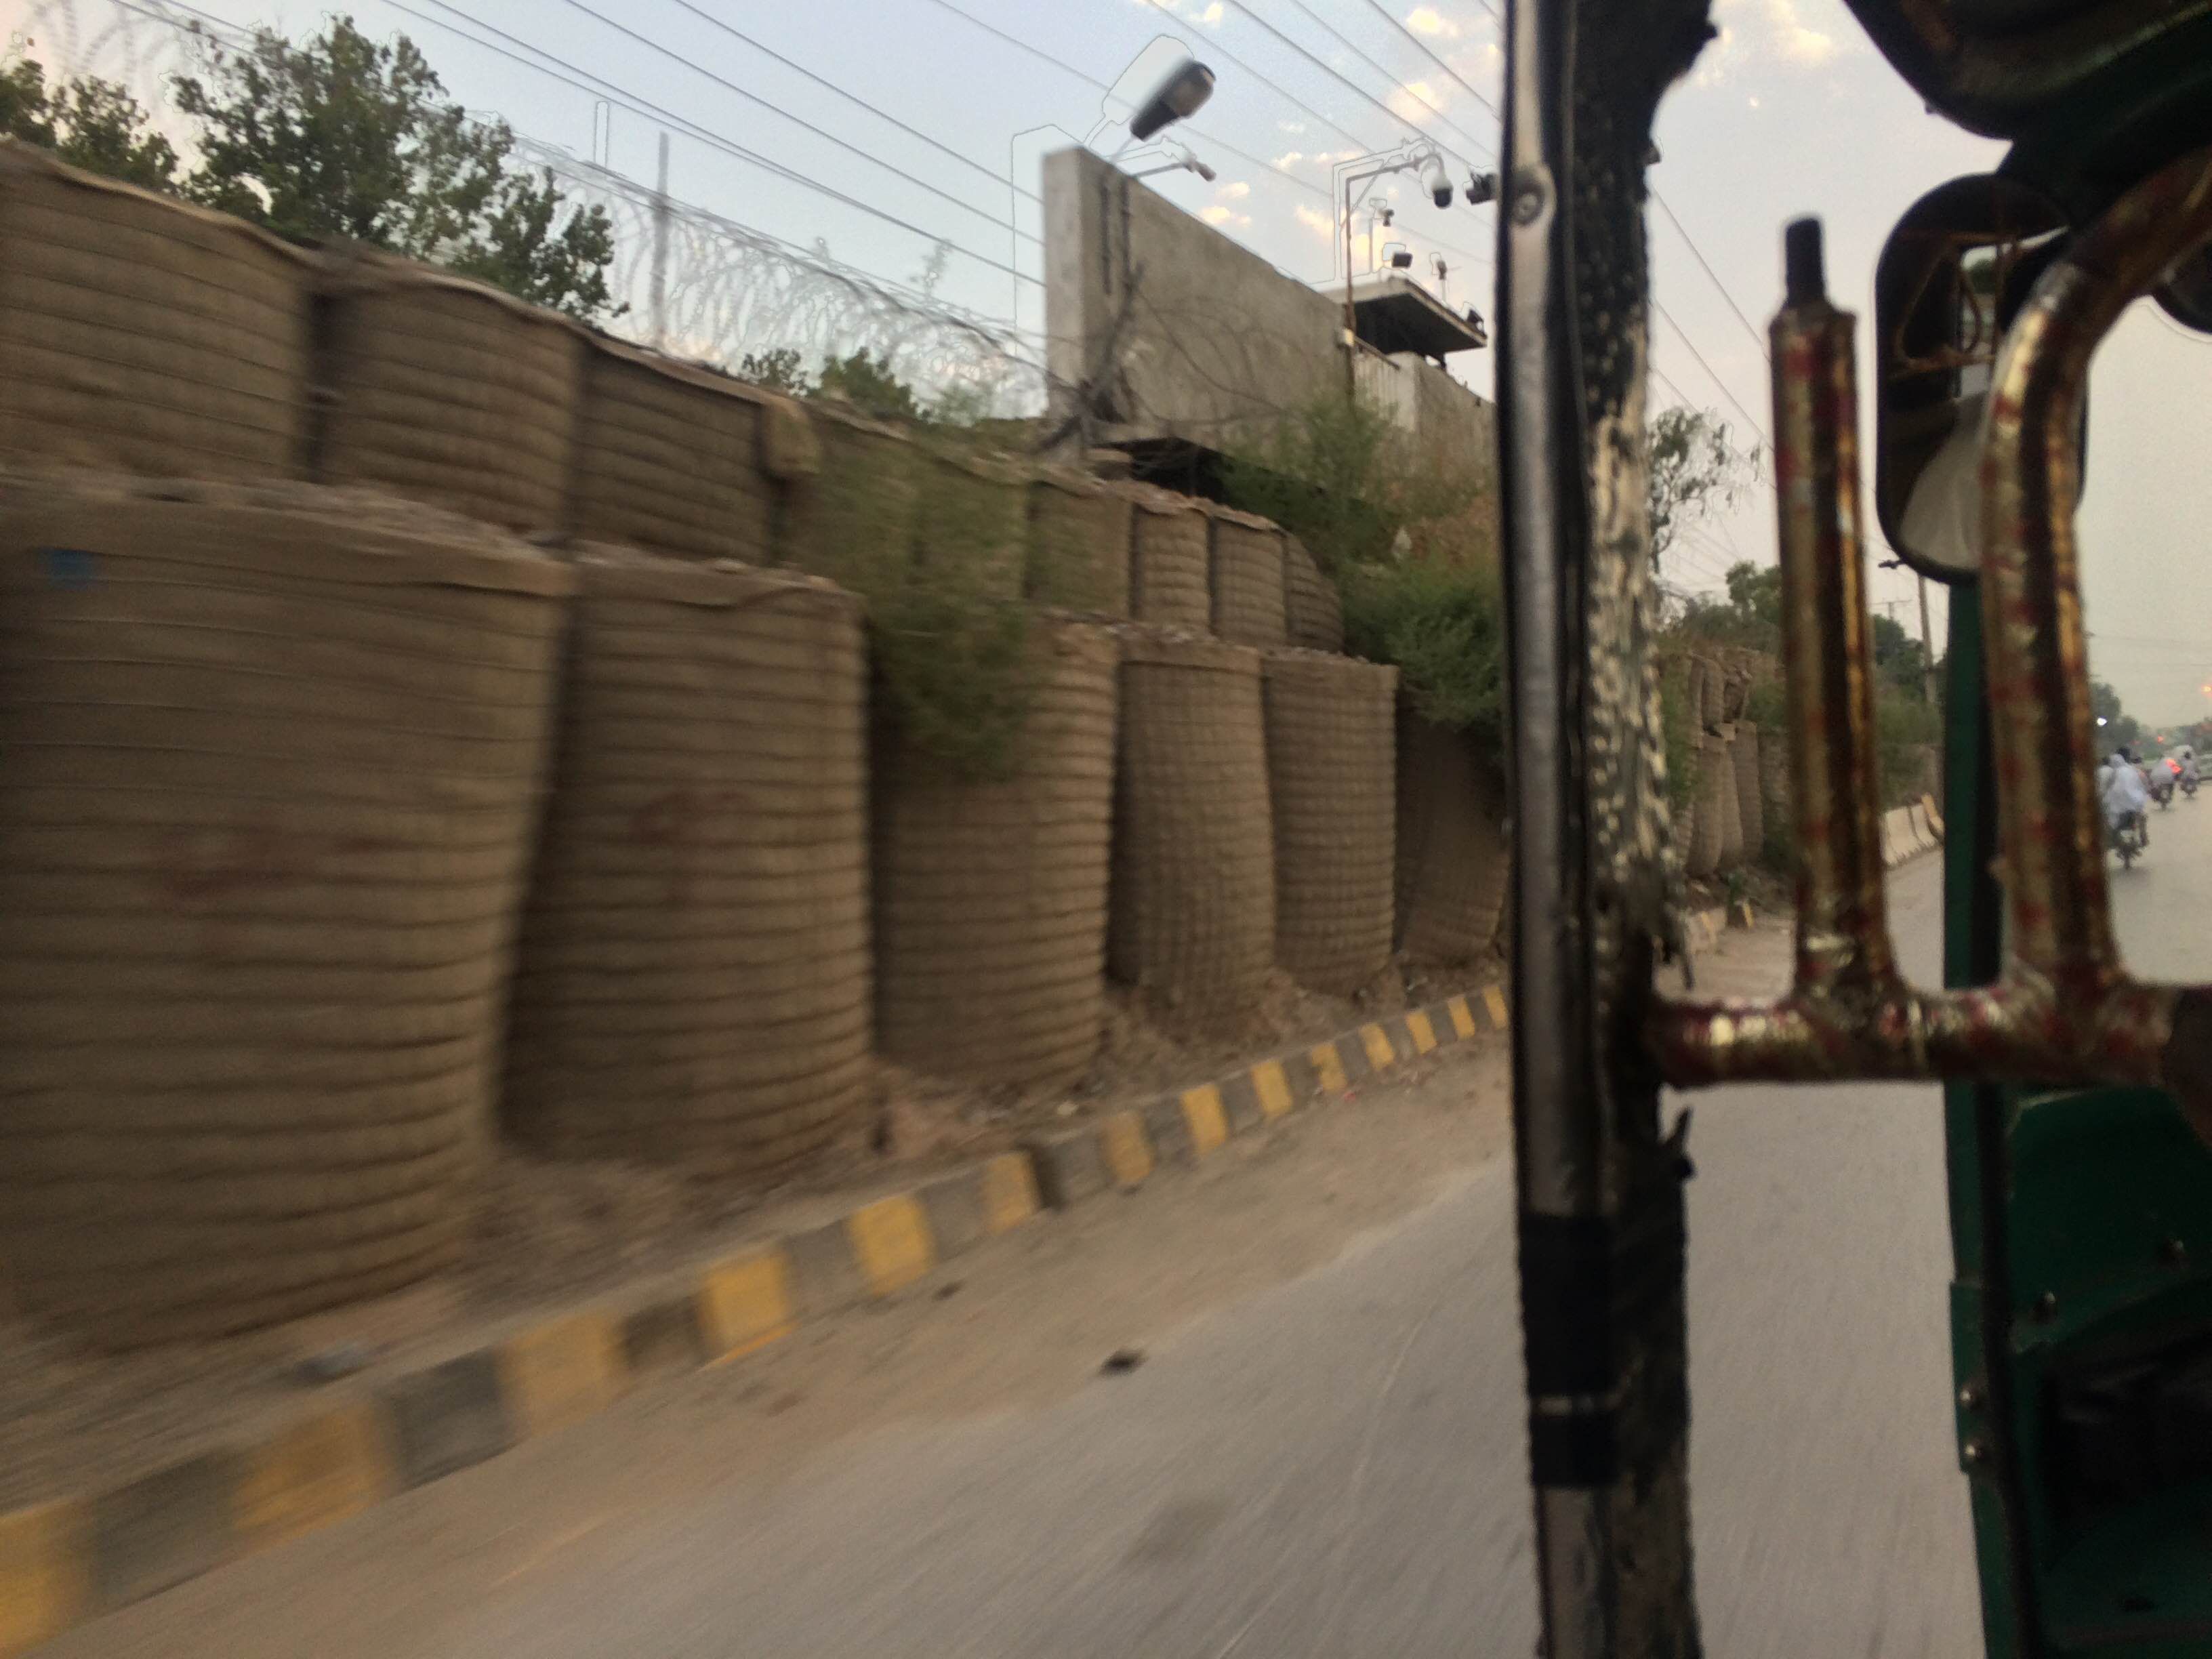 Walls of giant sand bags are now a common sight in Peshawar.  Image by Umar Farooq. Pakistan 2017.